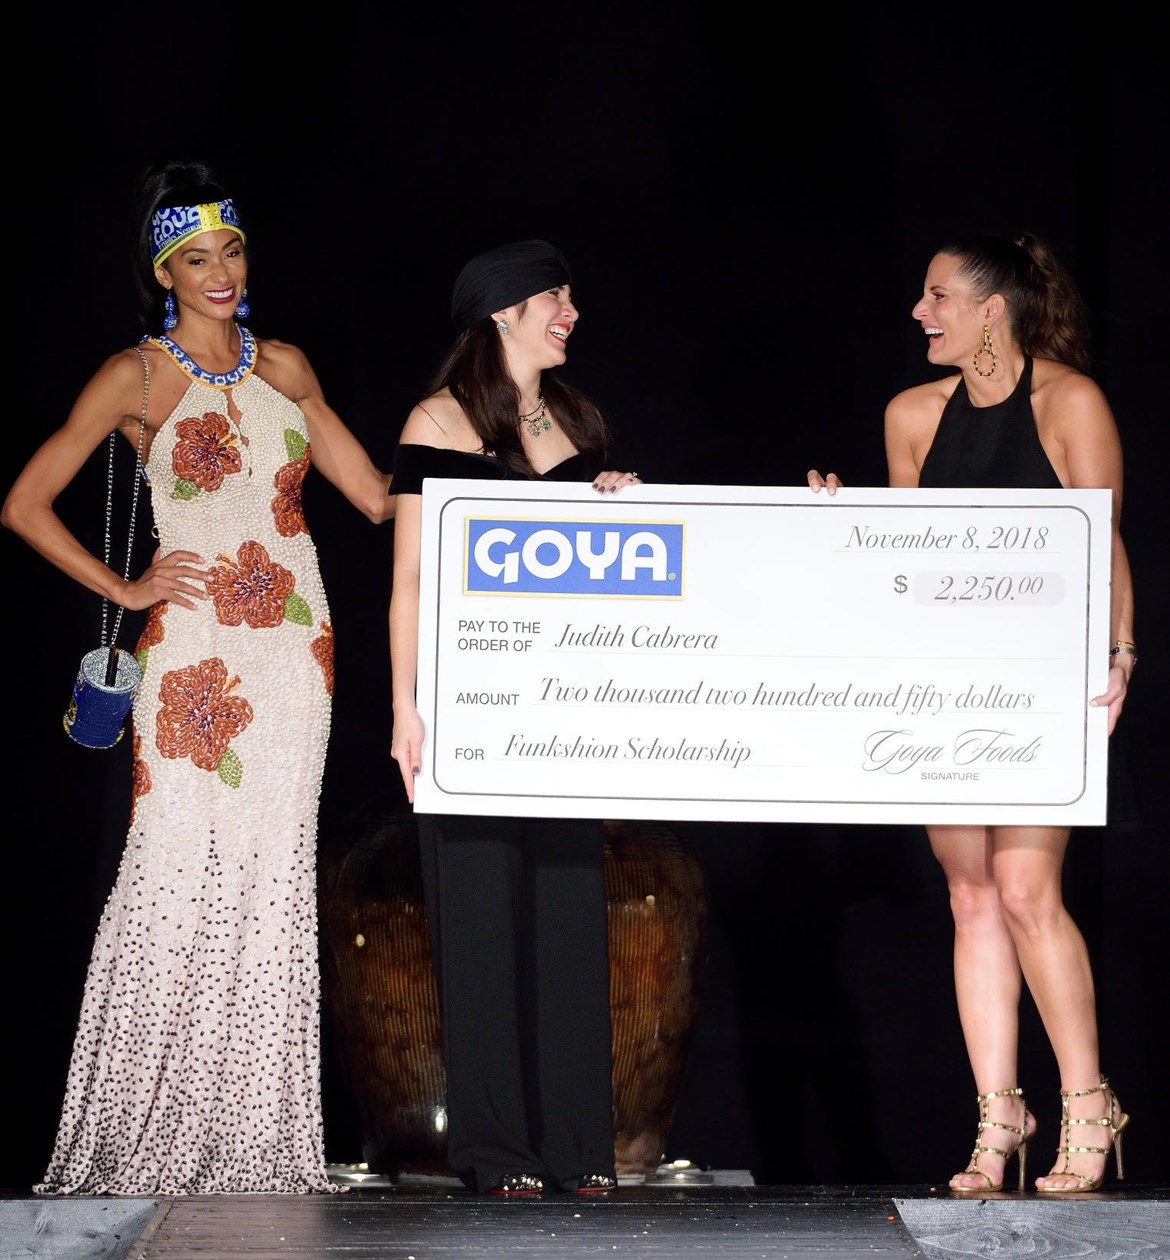 Press Release: Goya Foods Challenges Miami Students to Create High Fashion Designs Using Unconventional Materials: Goya Products